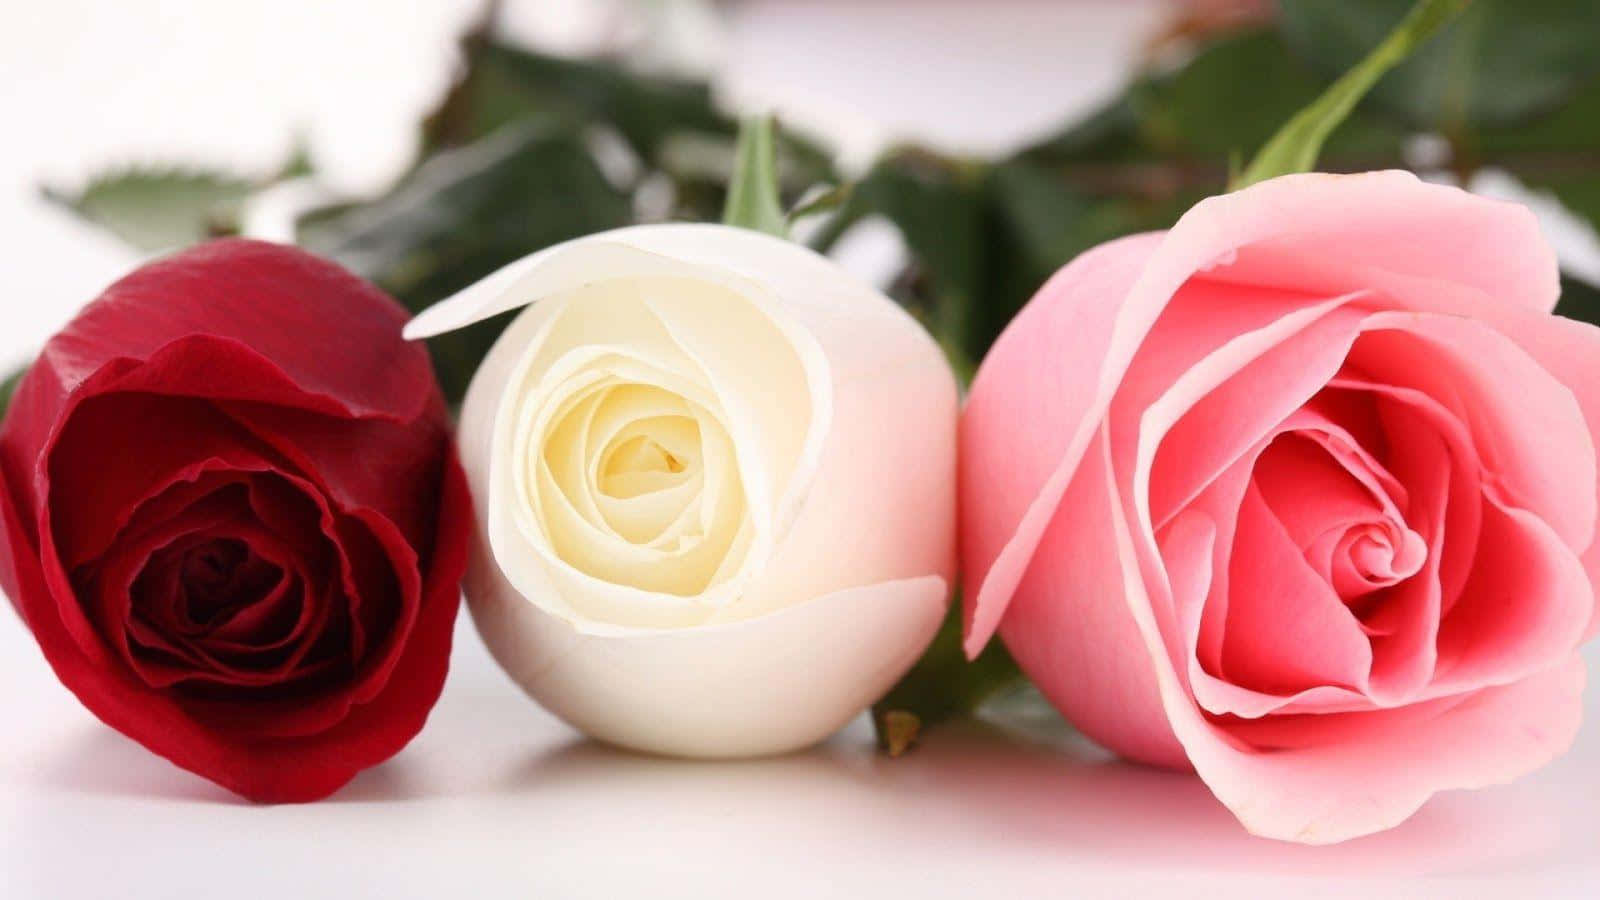 Bright and Colorful Bouquet of Roses Wallpaper